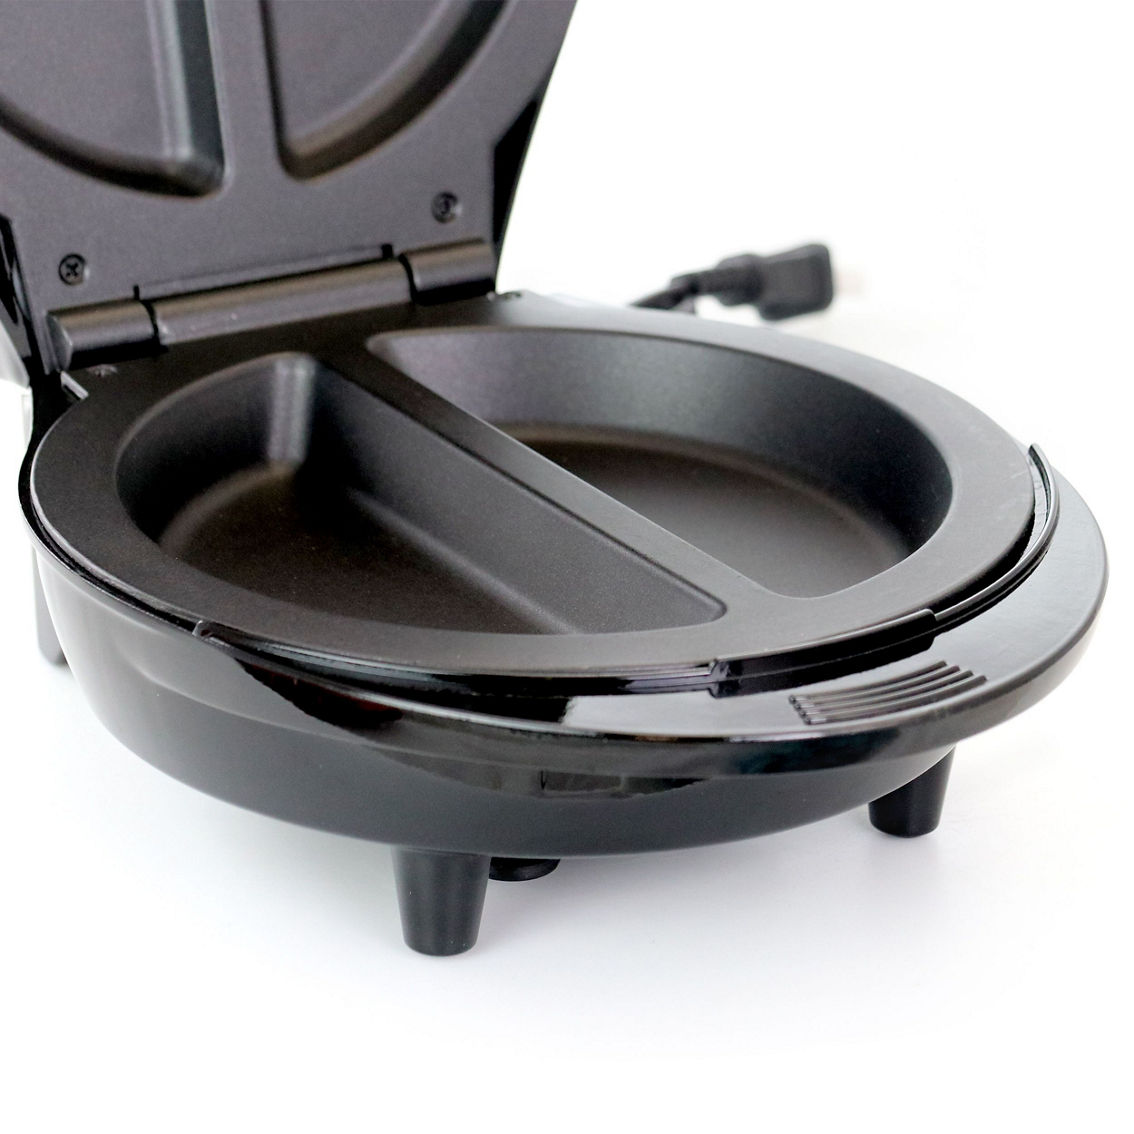 Better Chef Electric Double Omelet Maker - Black - Image 5 of 5